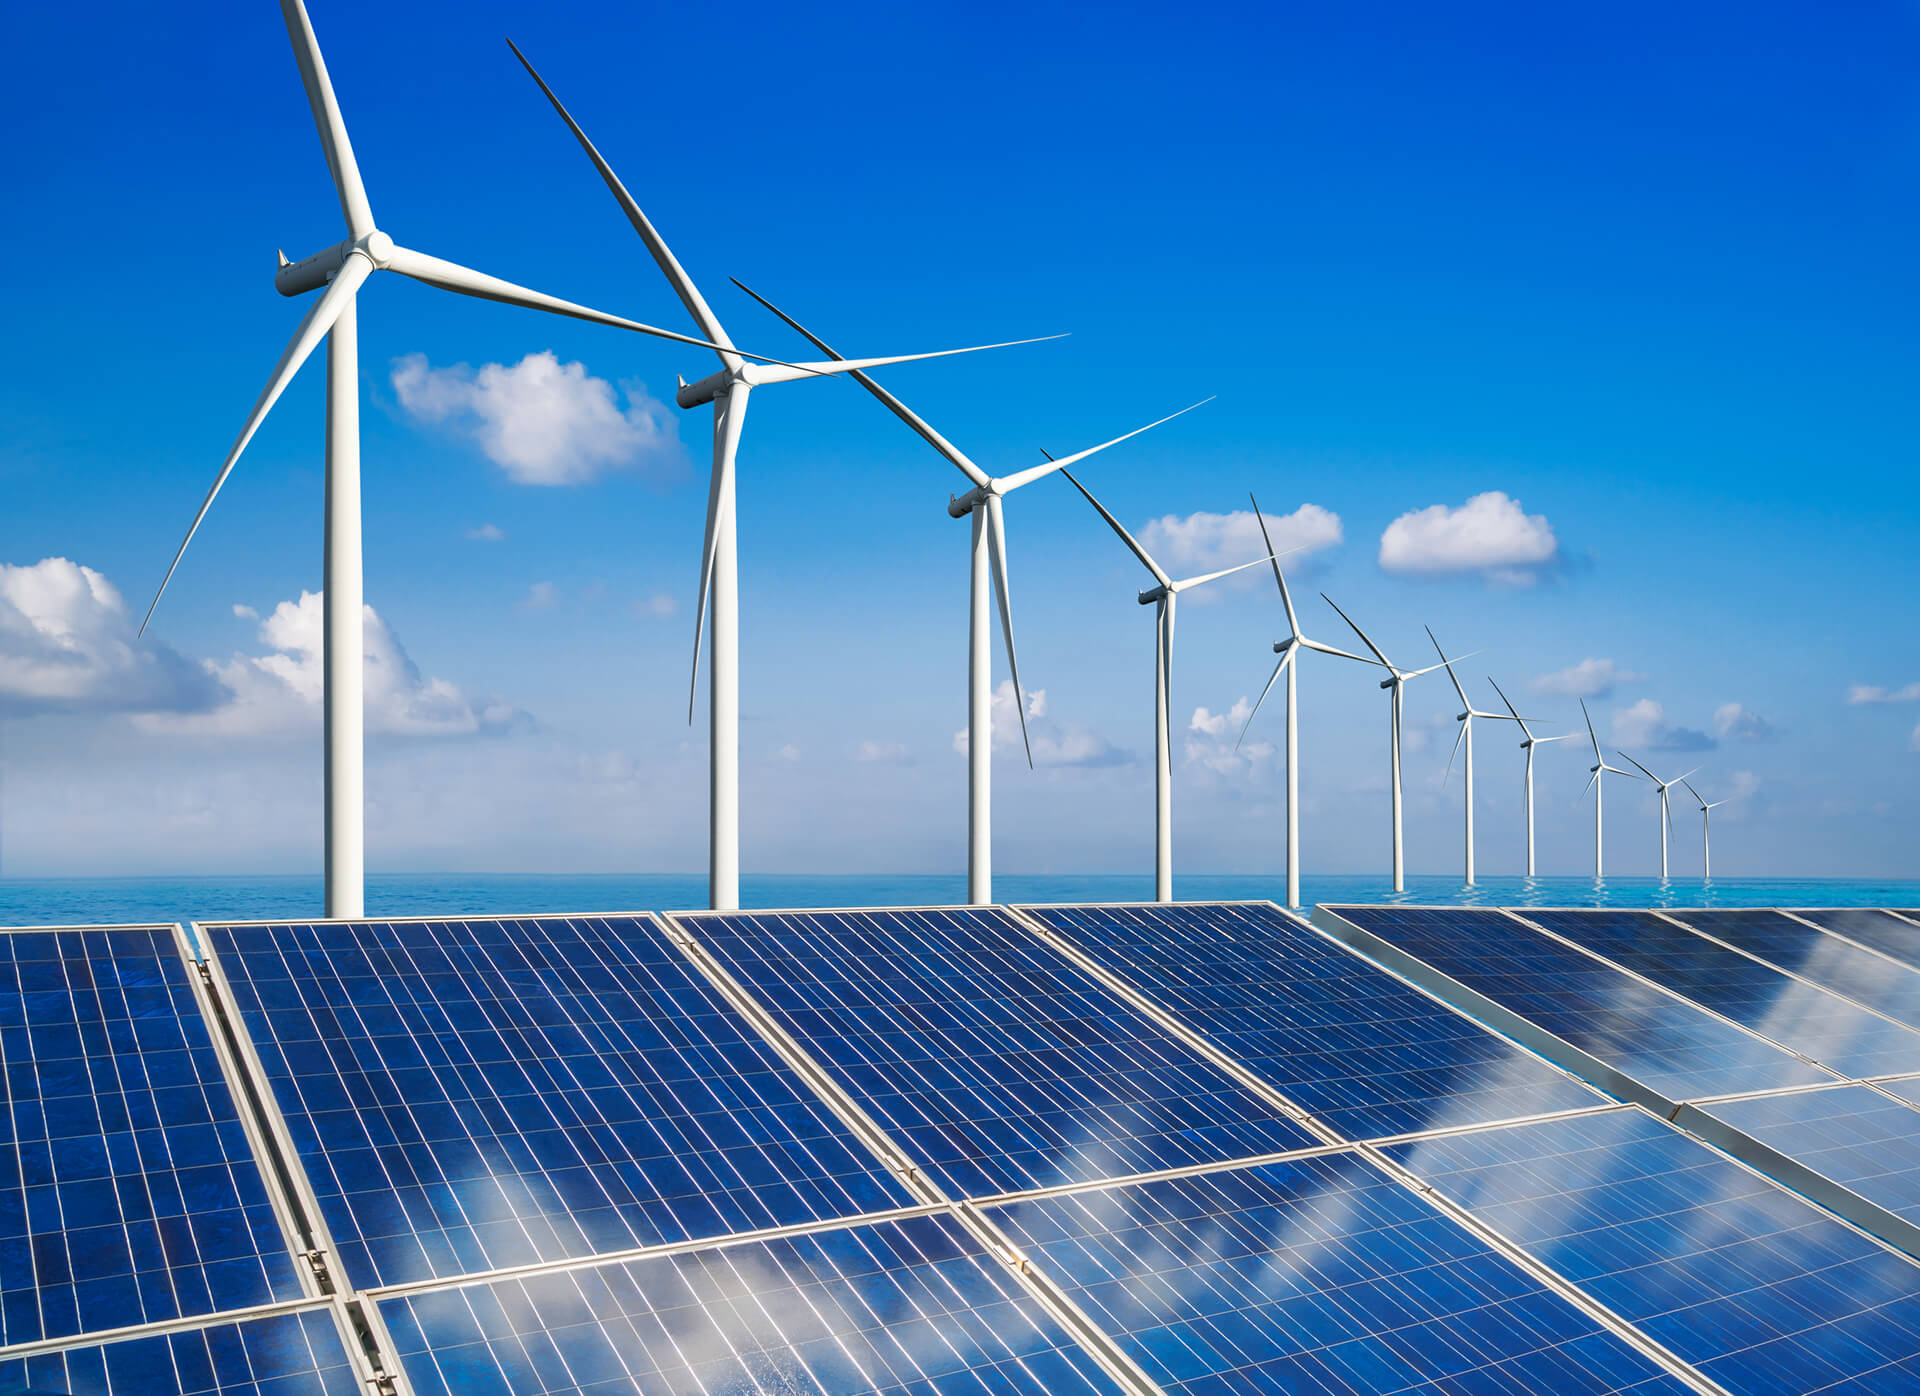 Feature image showing a side-by-side comparison of solar PV panels and a wind turbine against a clear blue sky, symbolizing the choice between solar and wind energy for renewable power solutions.